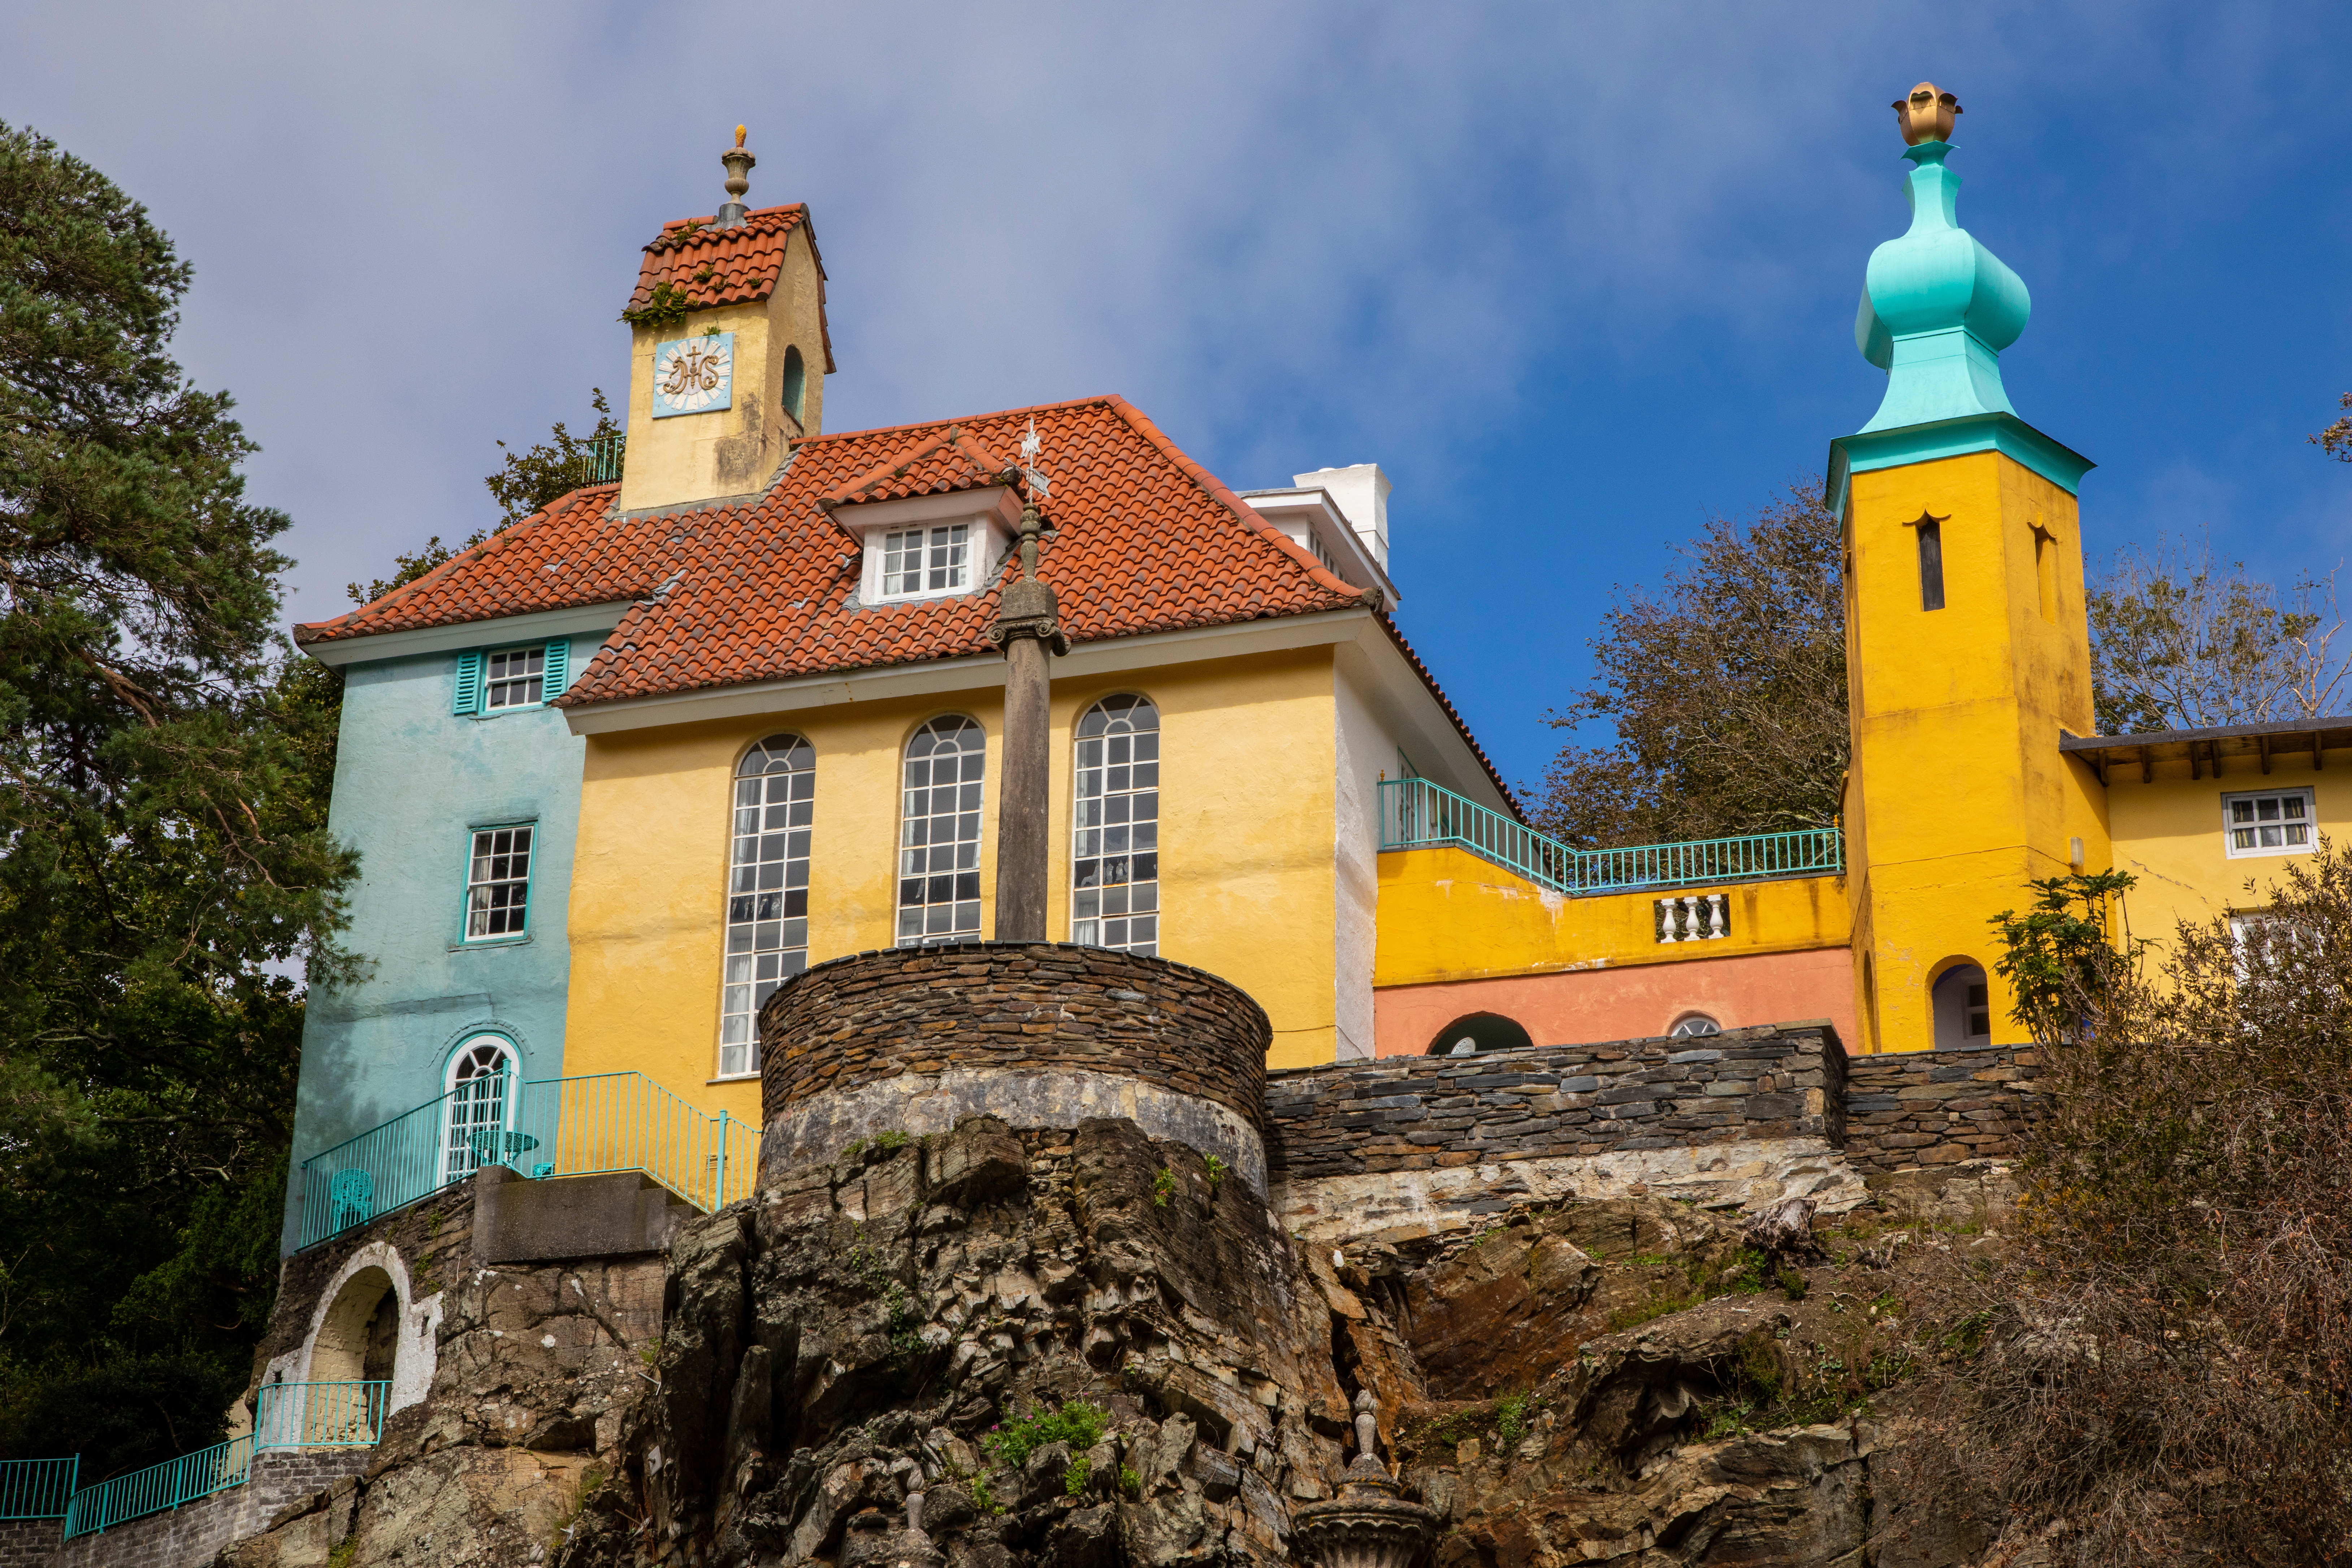 Portmeirion calls for more campervans and motorhome spaces and a longer season